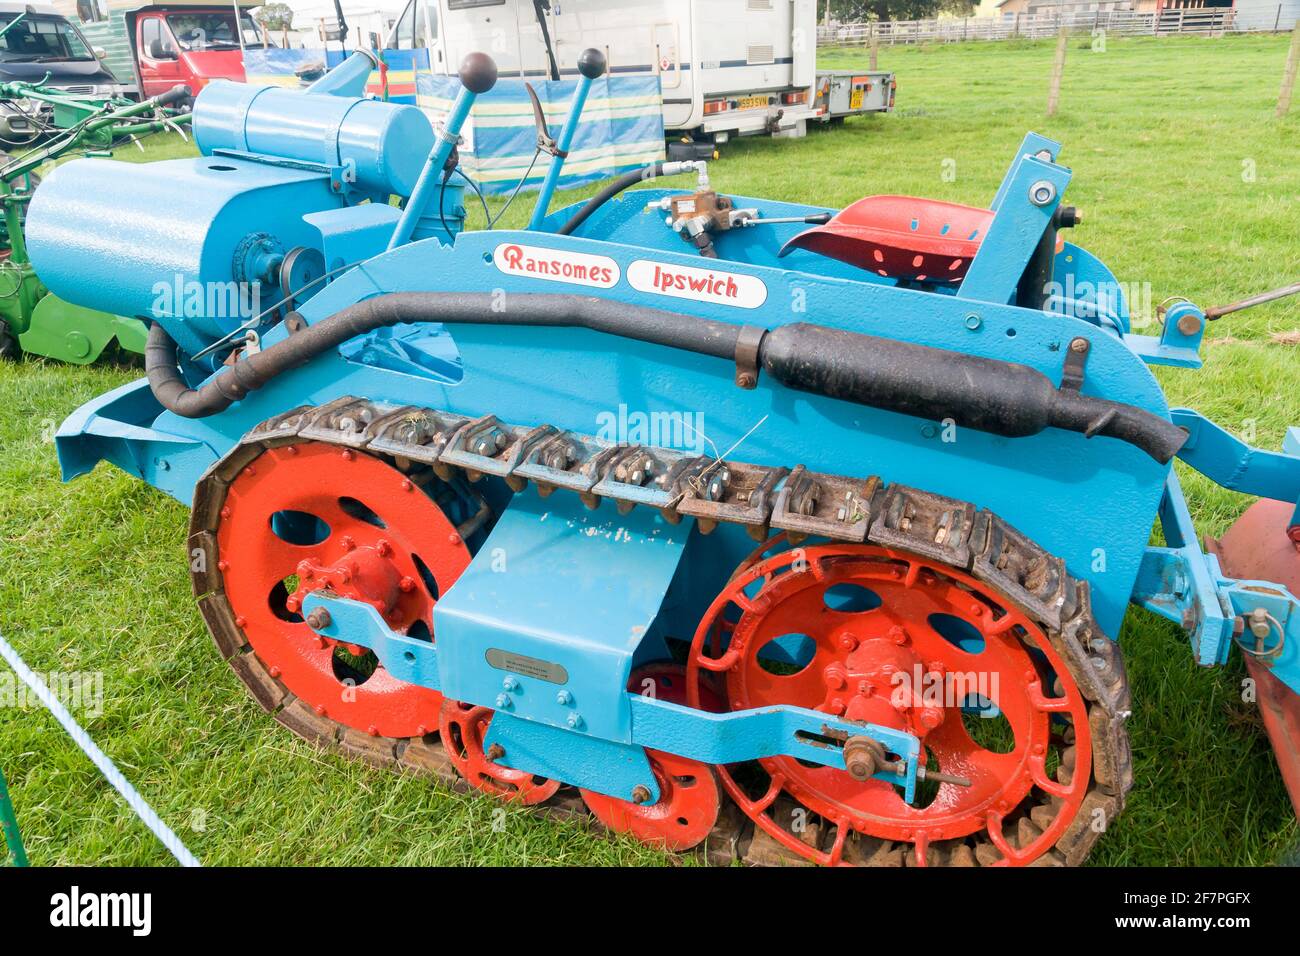 Vintage Ransomes MG2 Crawler Tractor ou Ransomes Motor Garden Cultivator  construit par Ransomes, Sims & Jefferies d'Ipswich, Angleterre de 1936 à  1965 Photo Stock - Alamy